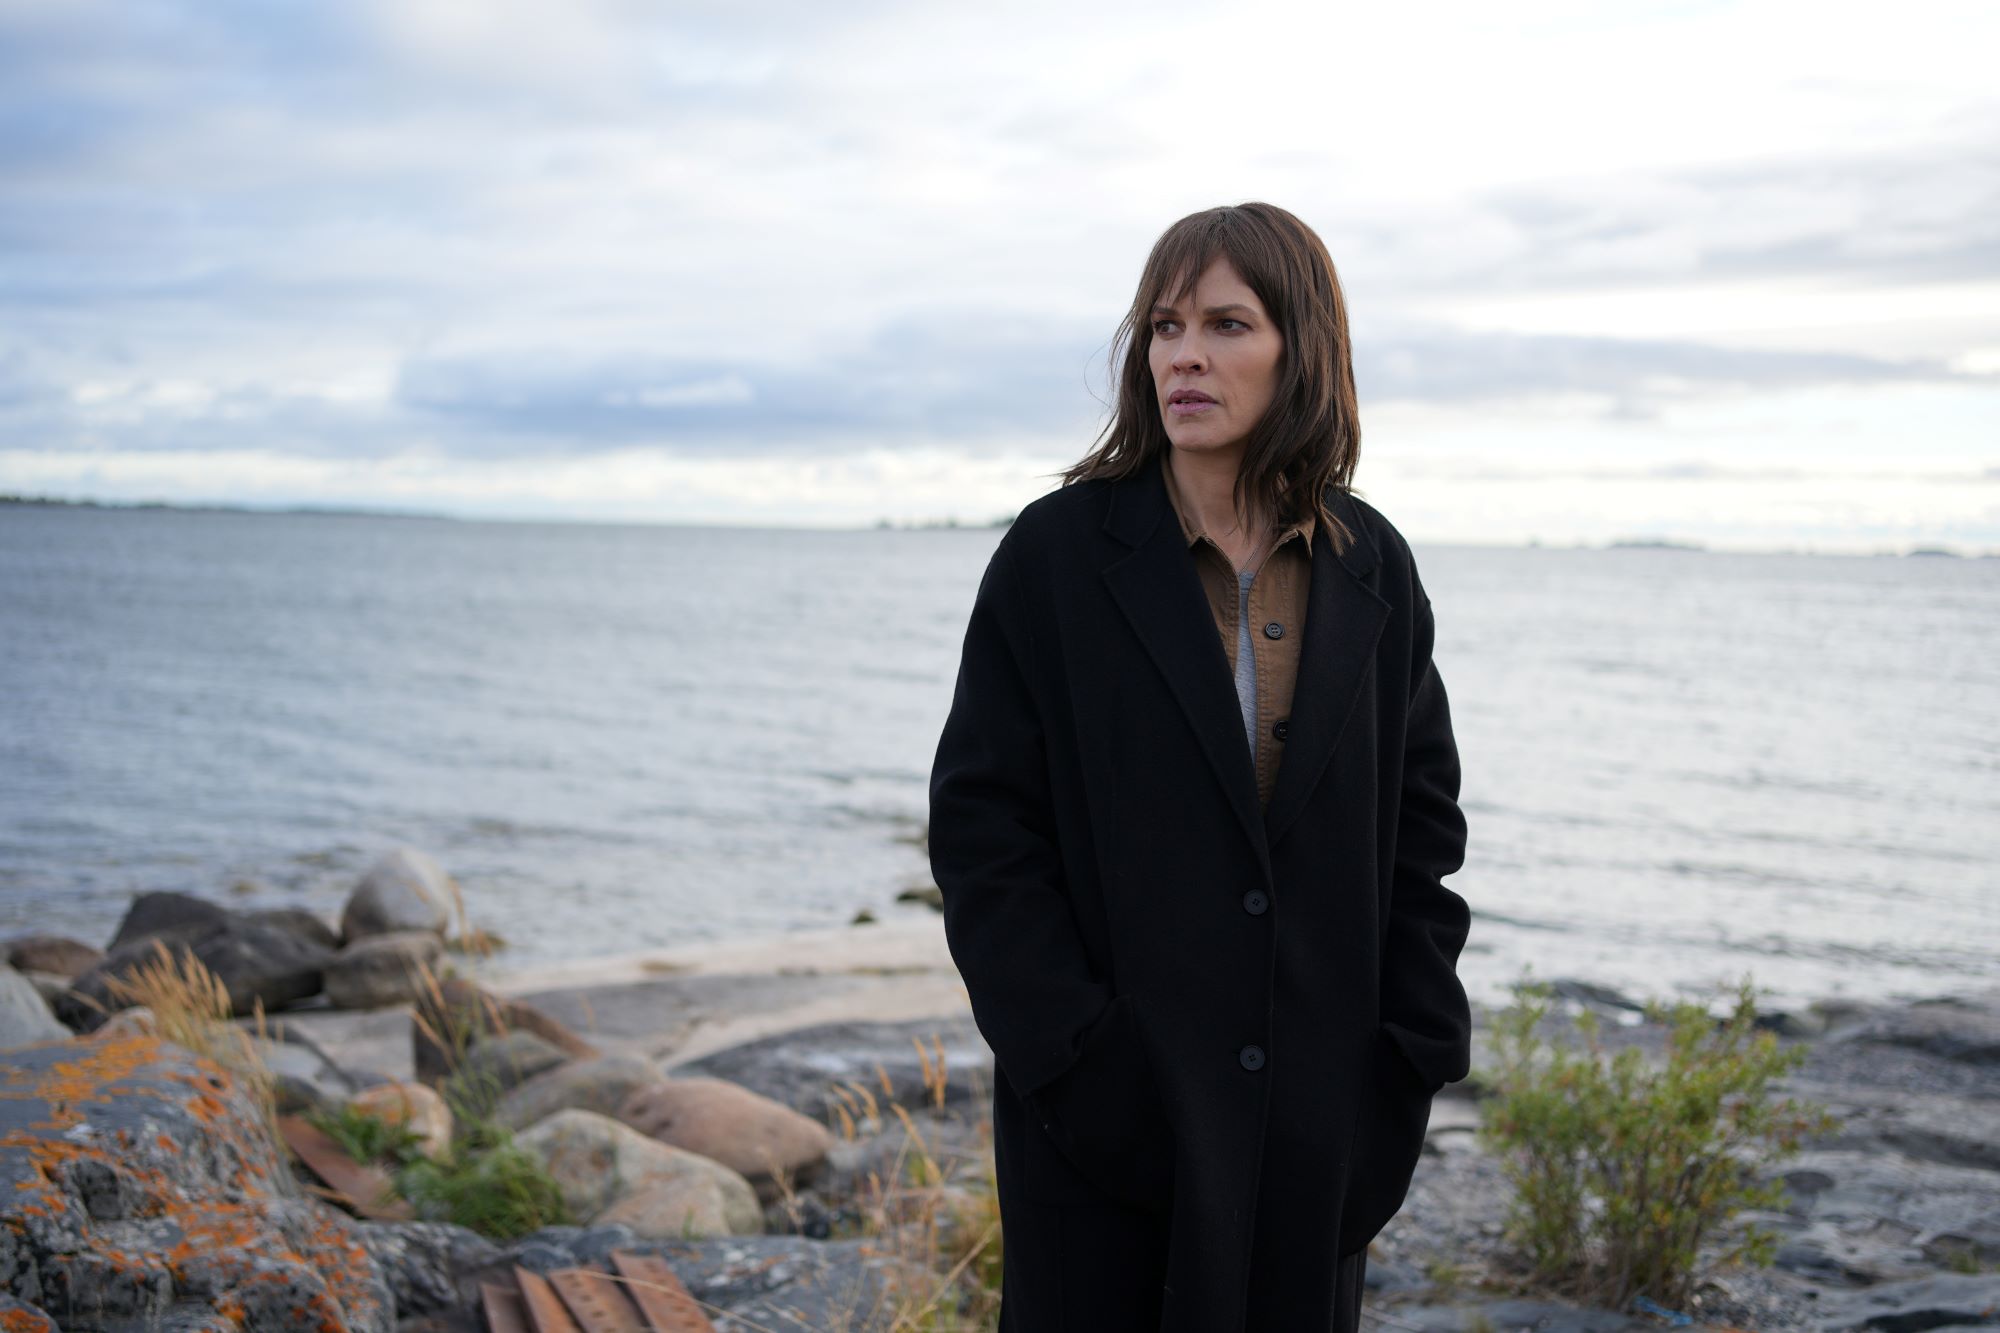 Hilary Swank, in character as Eileen Fitzgerald in the show 'Alaska Daily' on ABC,